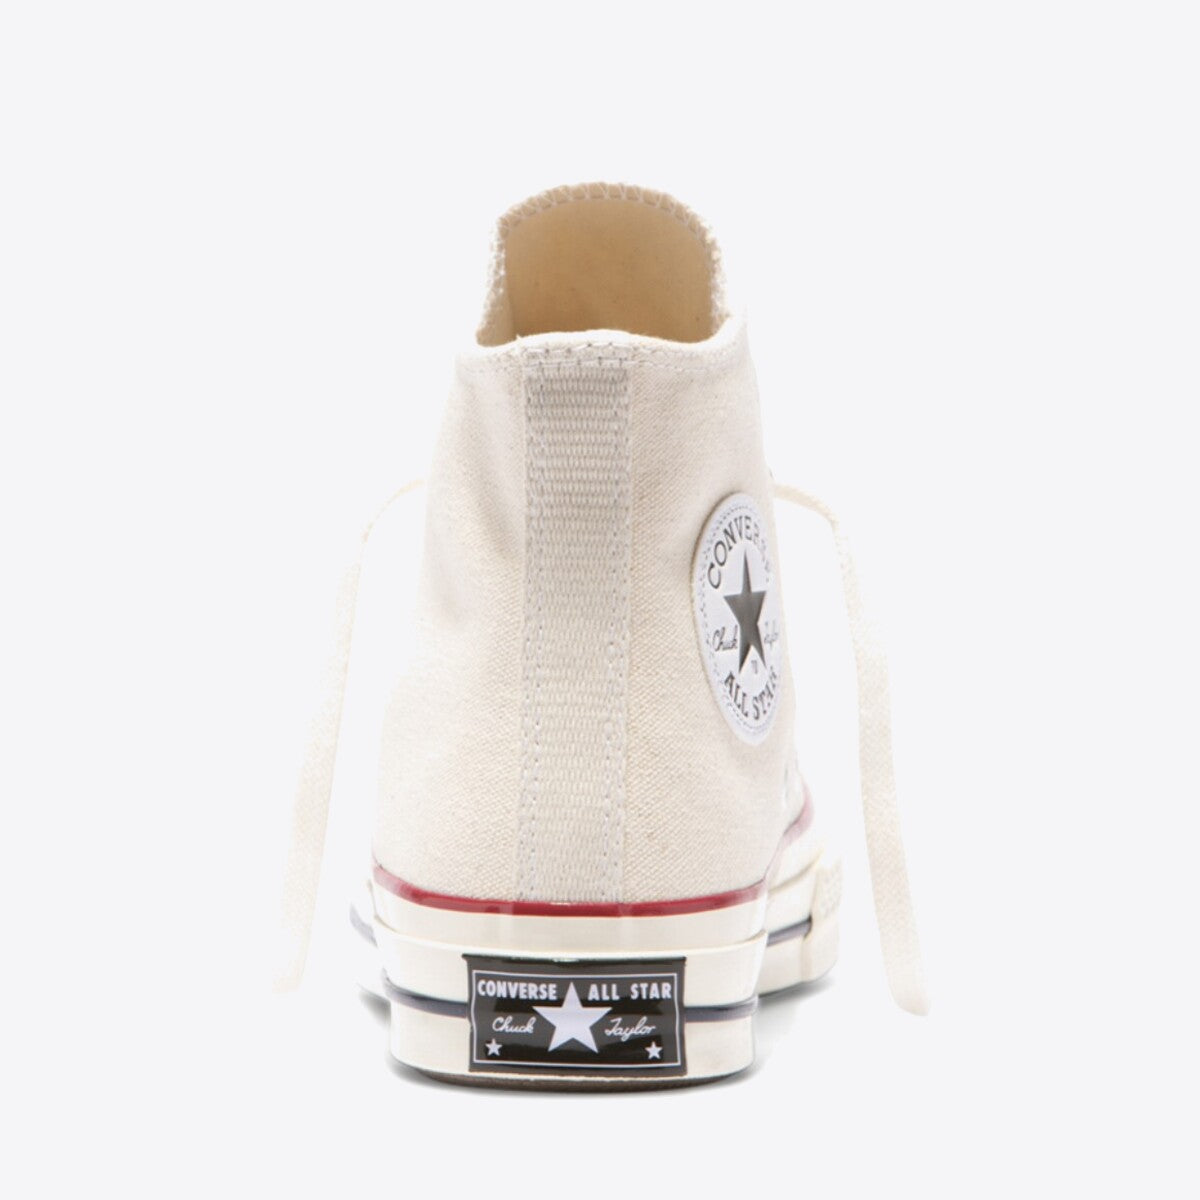 CONVERSE Chuck Taylor All Star 70 Canvas High Parchment - Image 3